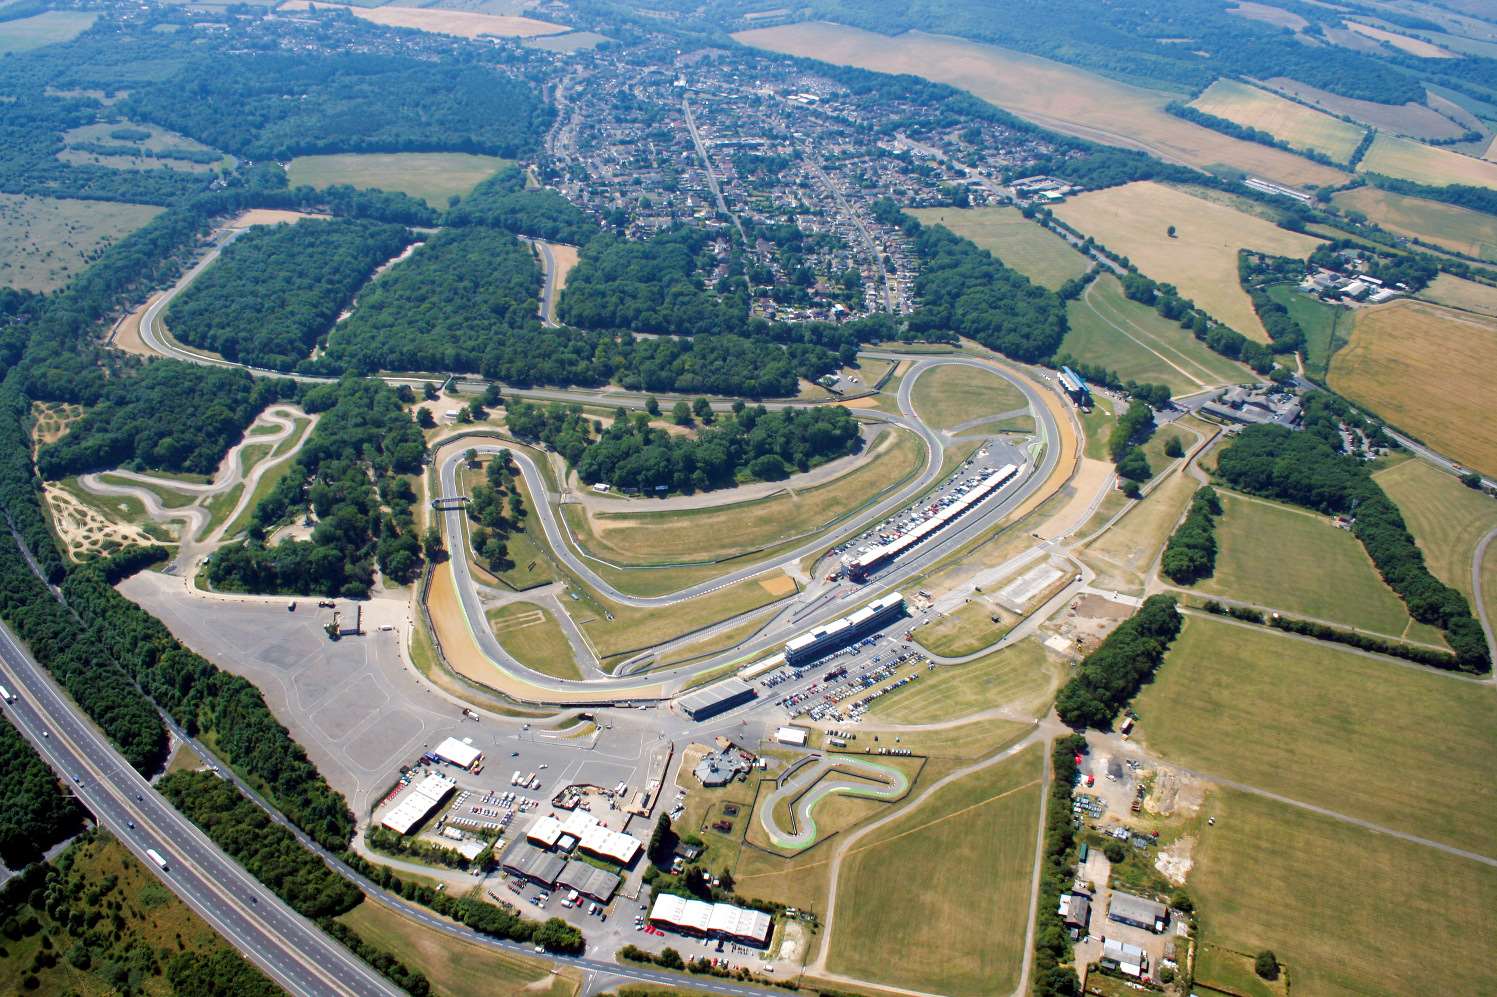 The race circuit from above